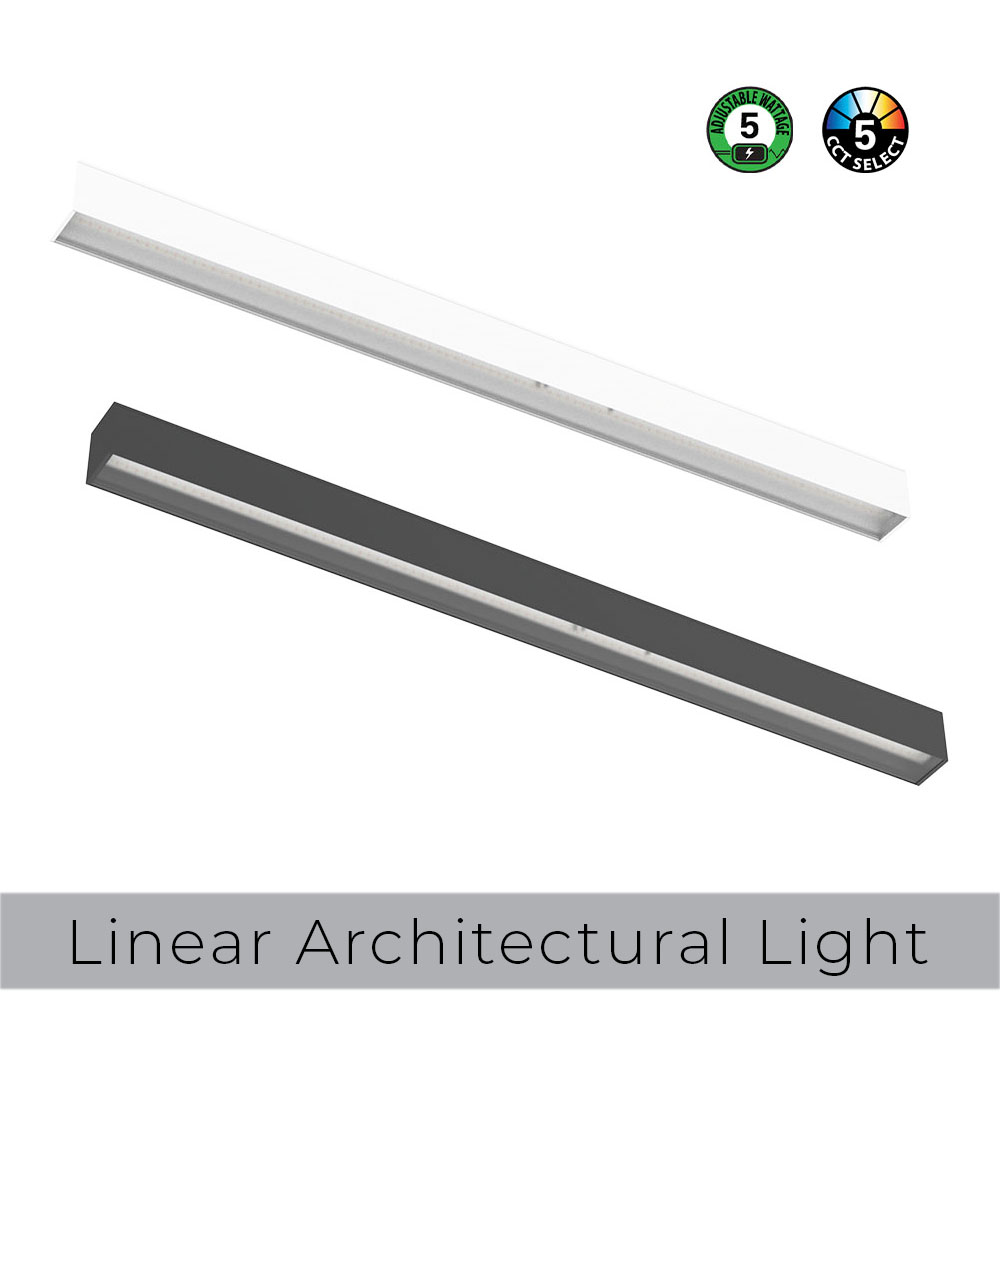 naturaled linear architectural light